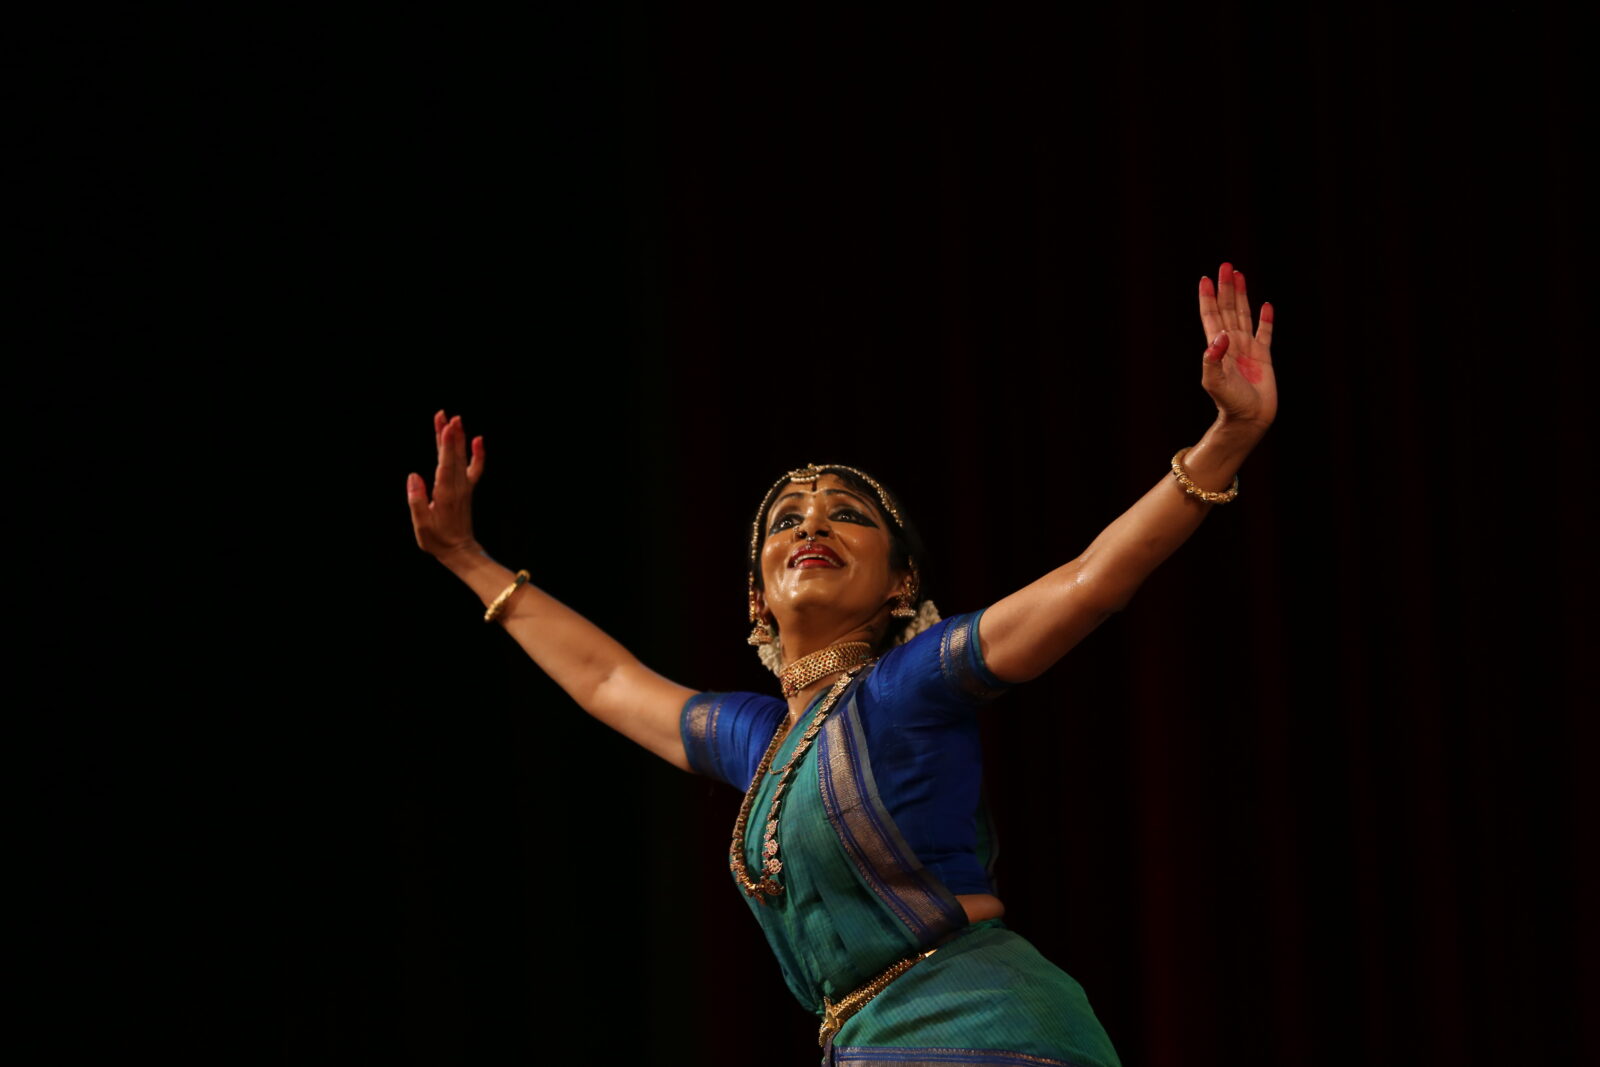 A woman from India performing the traditional dance of her country during an event for diplomacy between Burma and India in Yangon, on May 3, 2016. (Hong Sar)